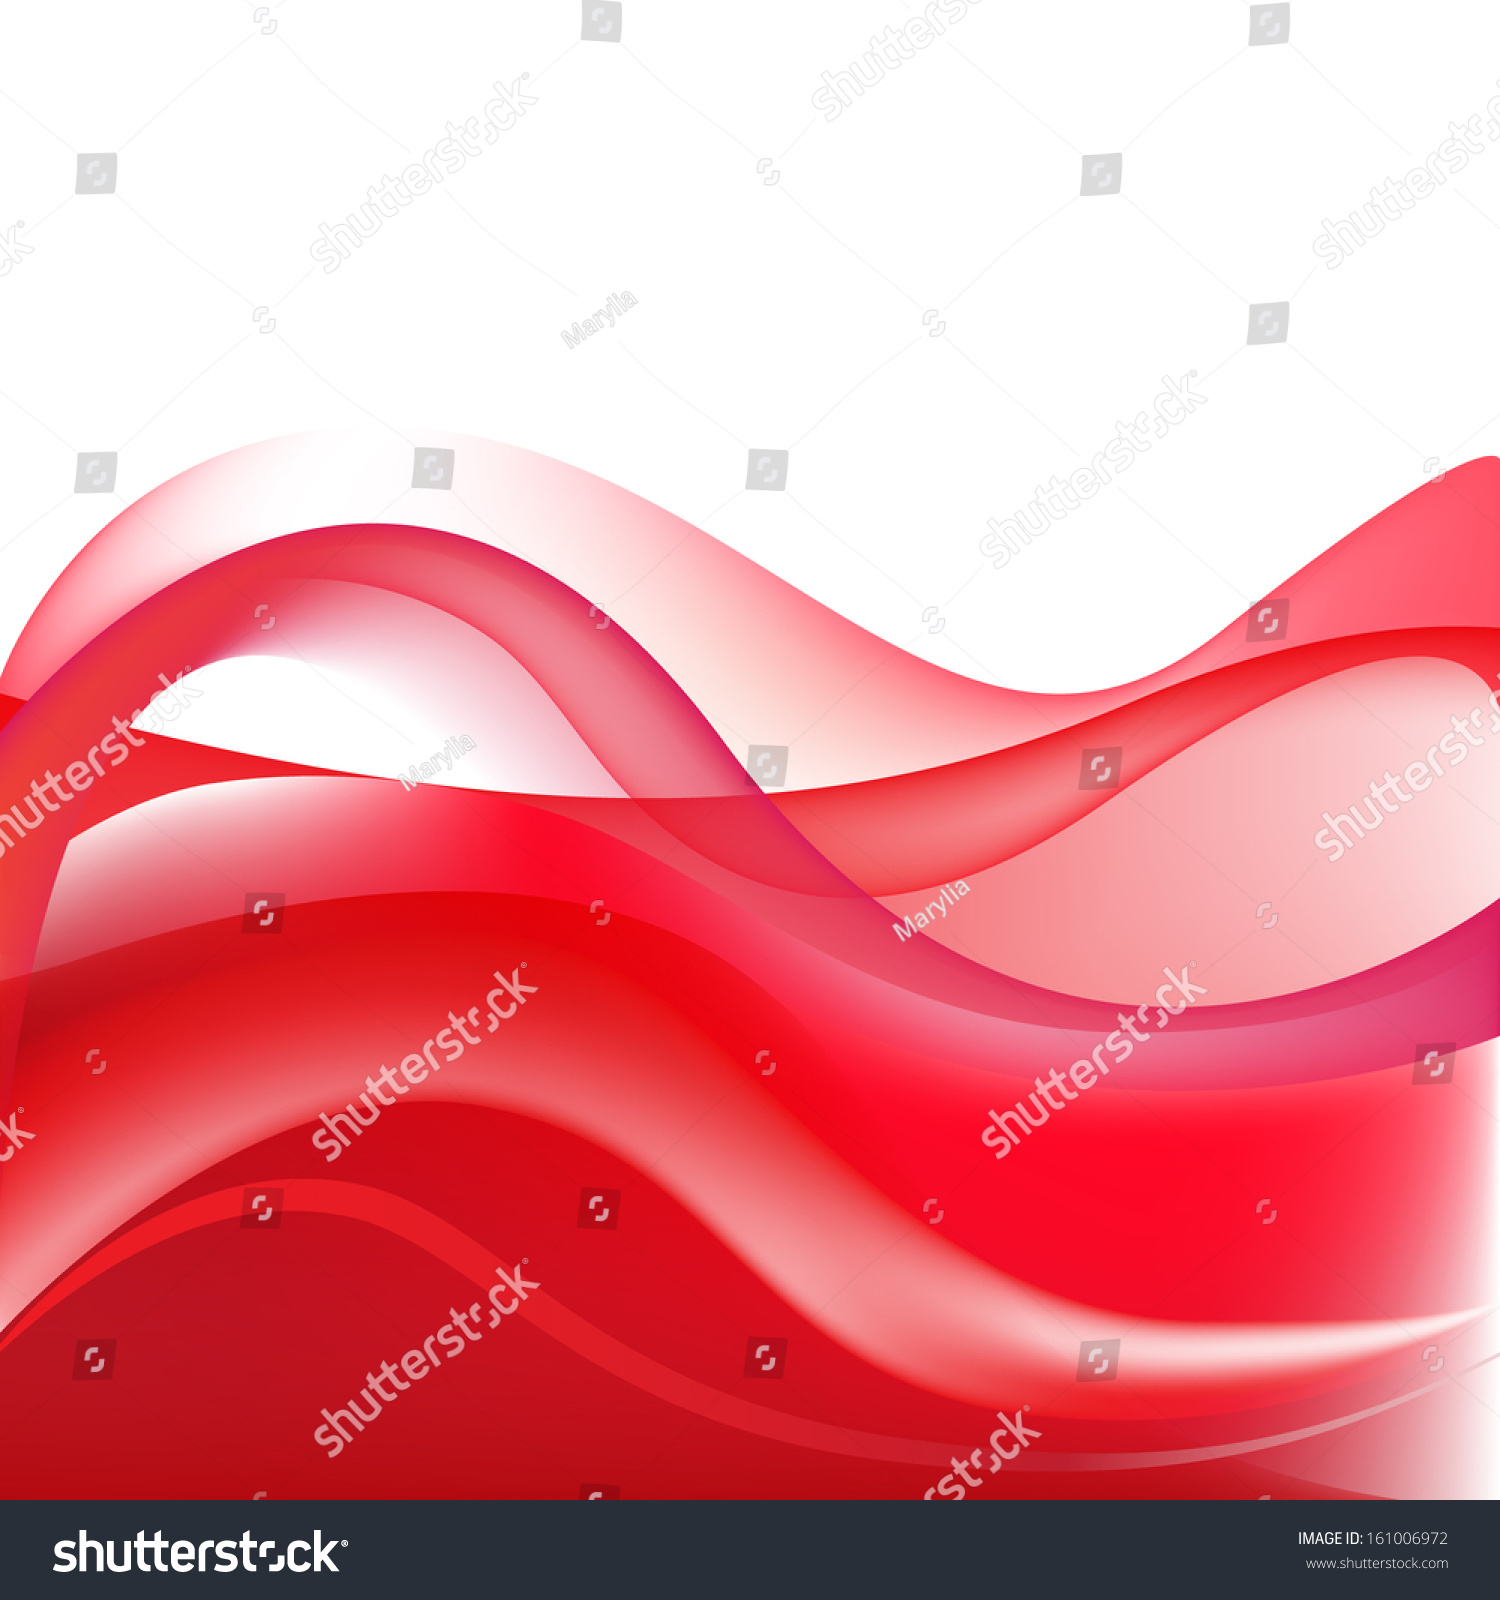 Vector Red Abstract Wavy Background - 161006972 : Shutterstock